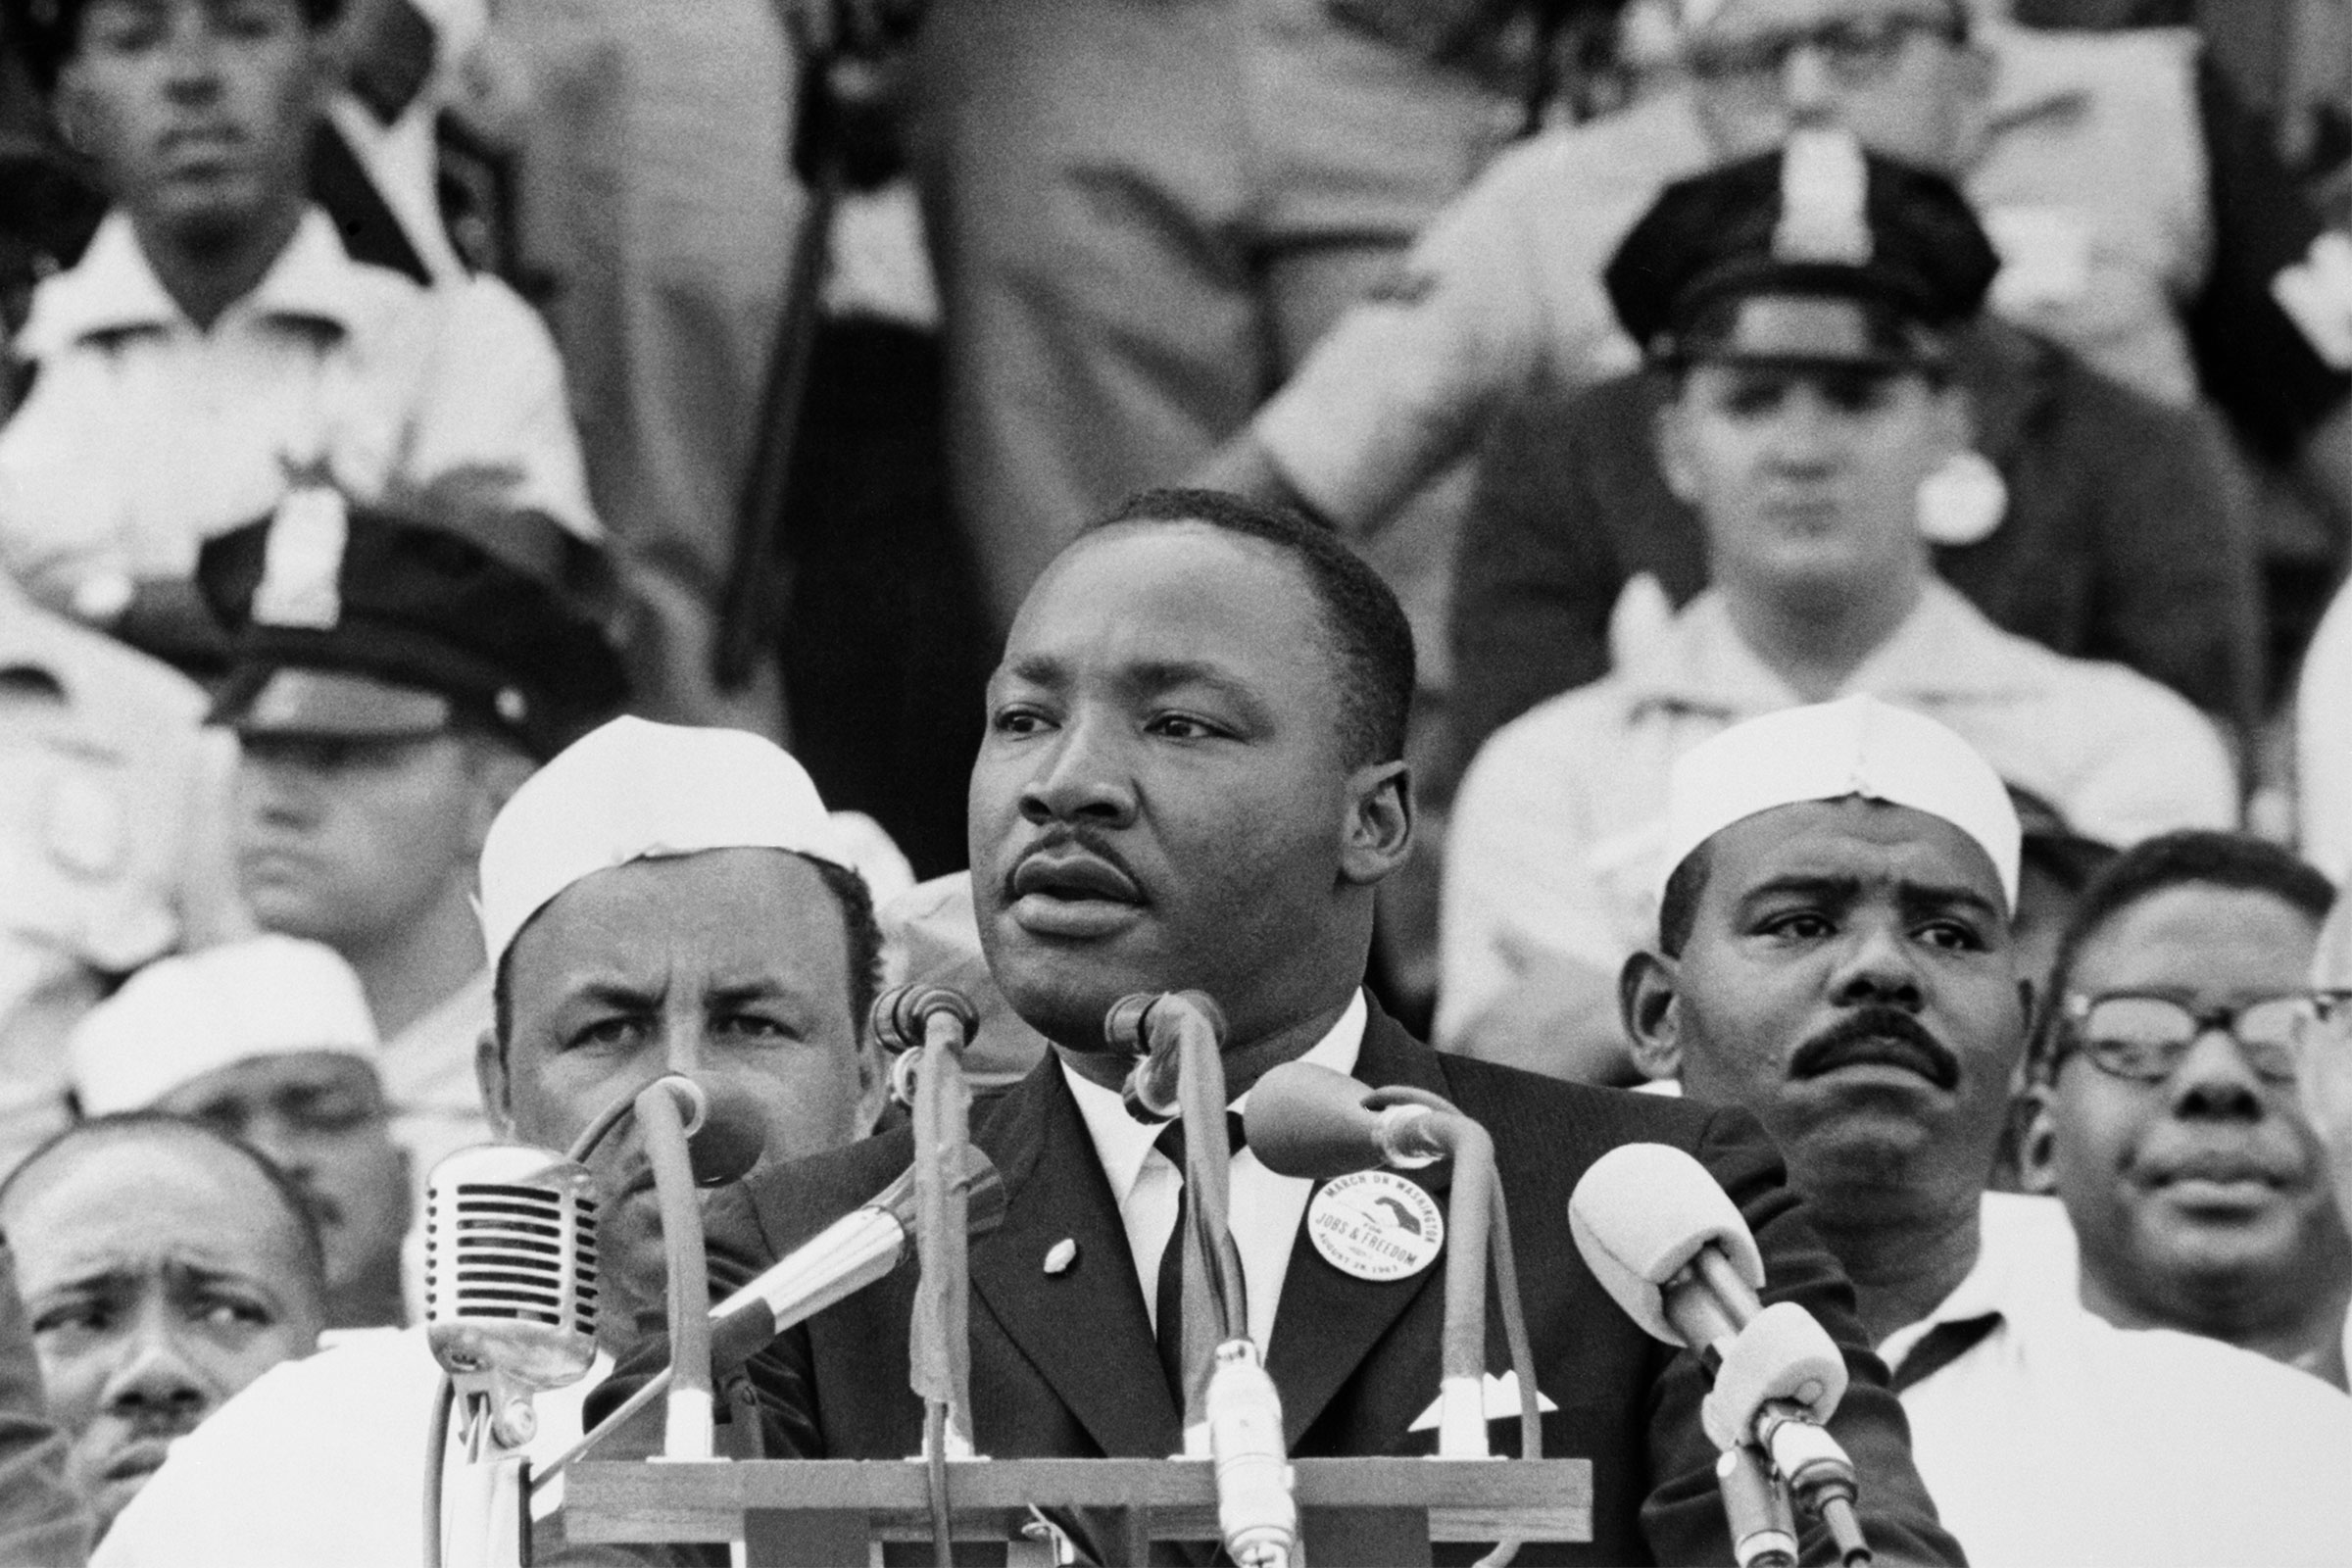 Martin Luther King Jr. gives his "I Have a Dream" speech to a crowd during the March on Washington on August 28, 1963. (Bettmann/Corbis)